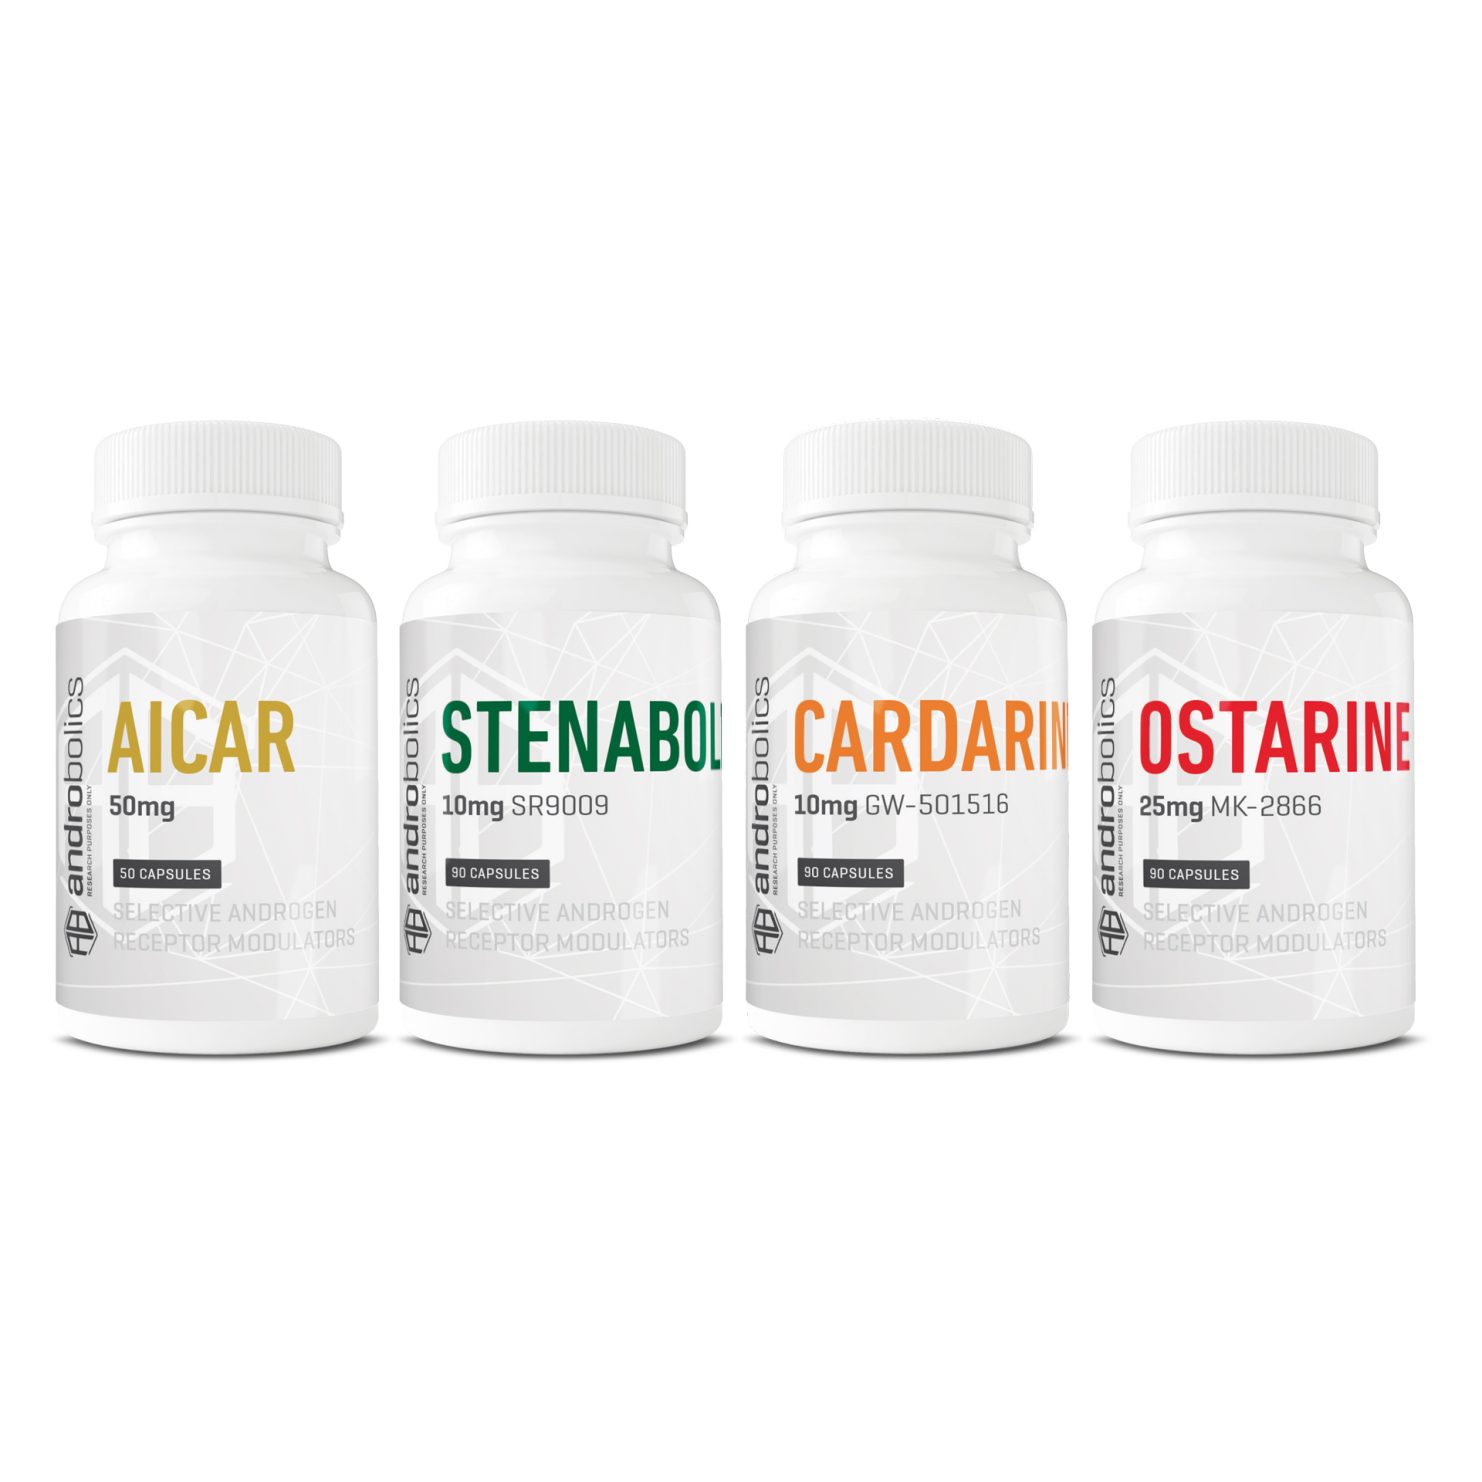 Athlete SARMs Stack with Aicar, Ostarine, Cardarine, and Stenabolic bottles from Androbolics.